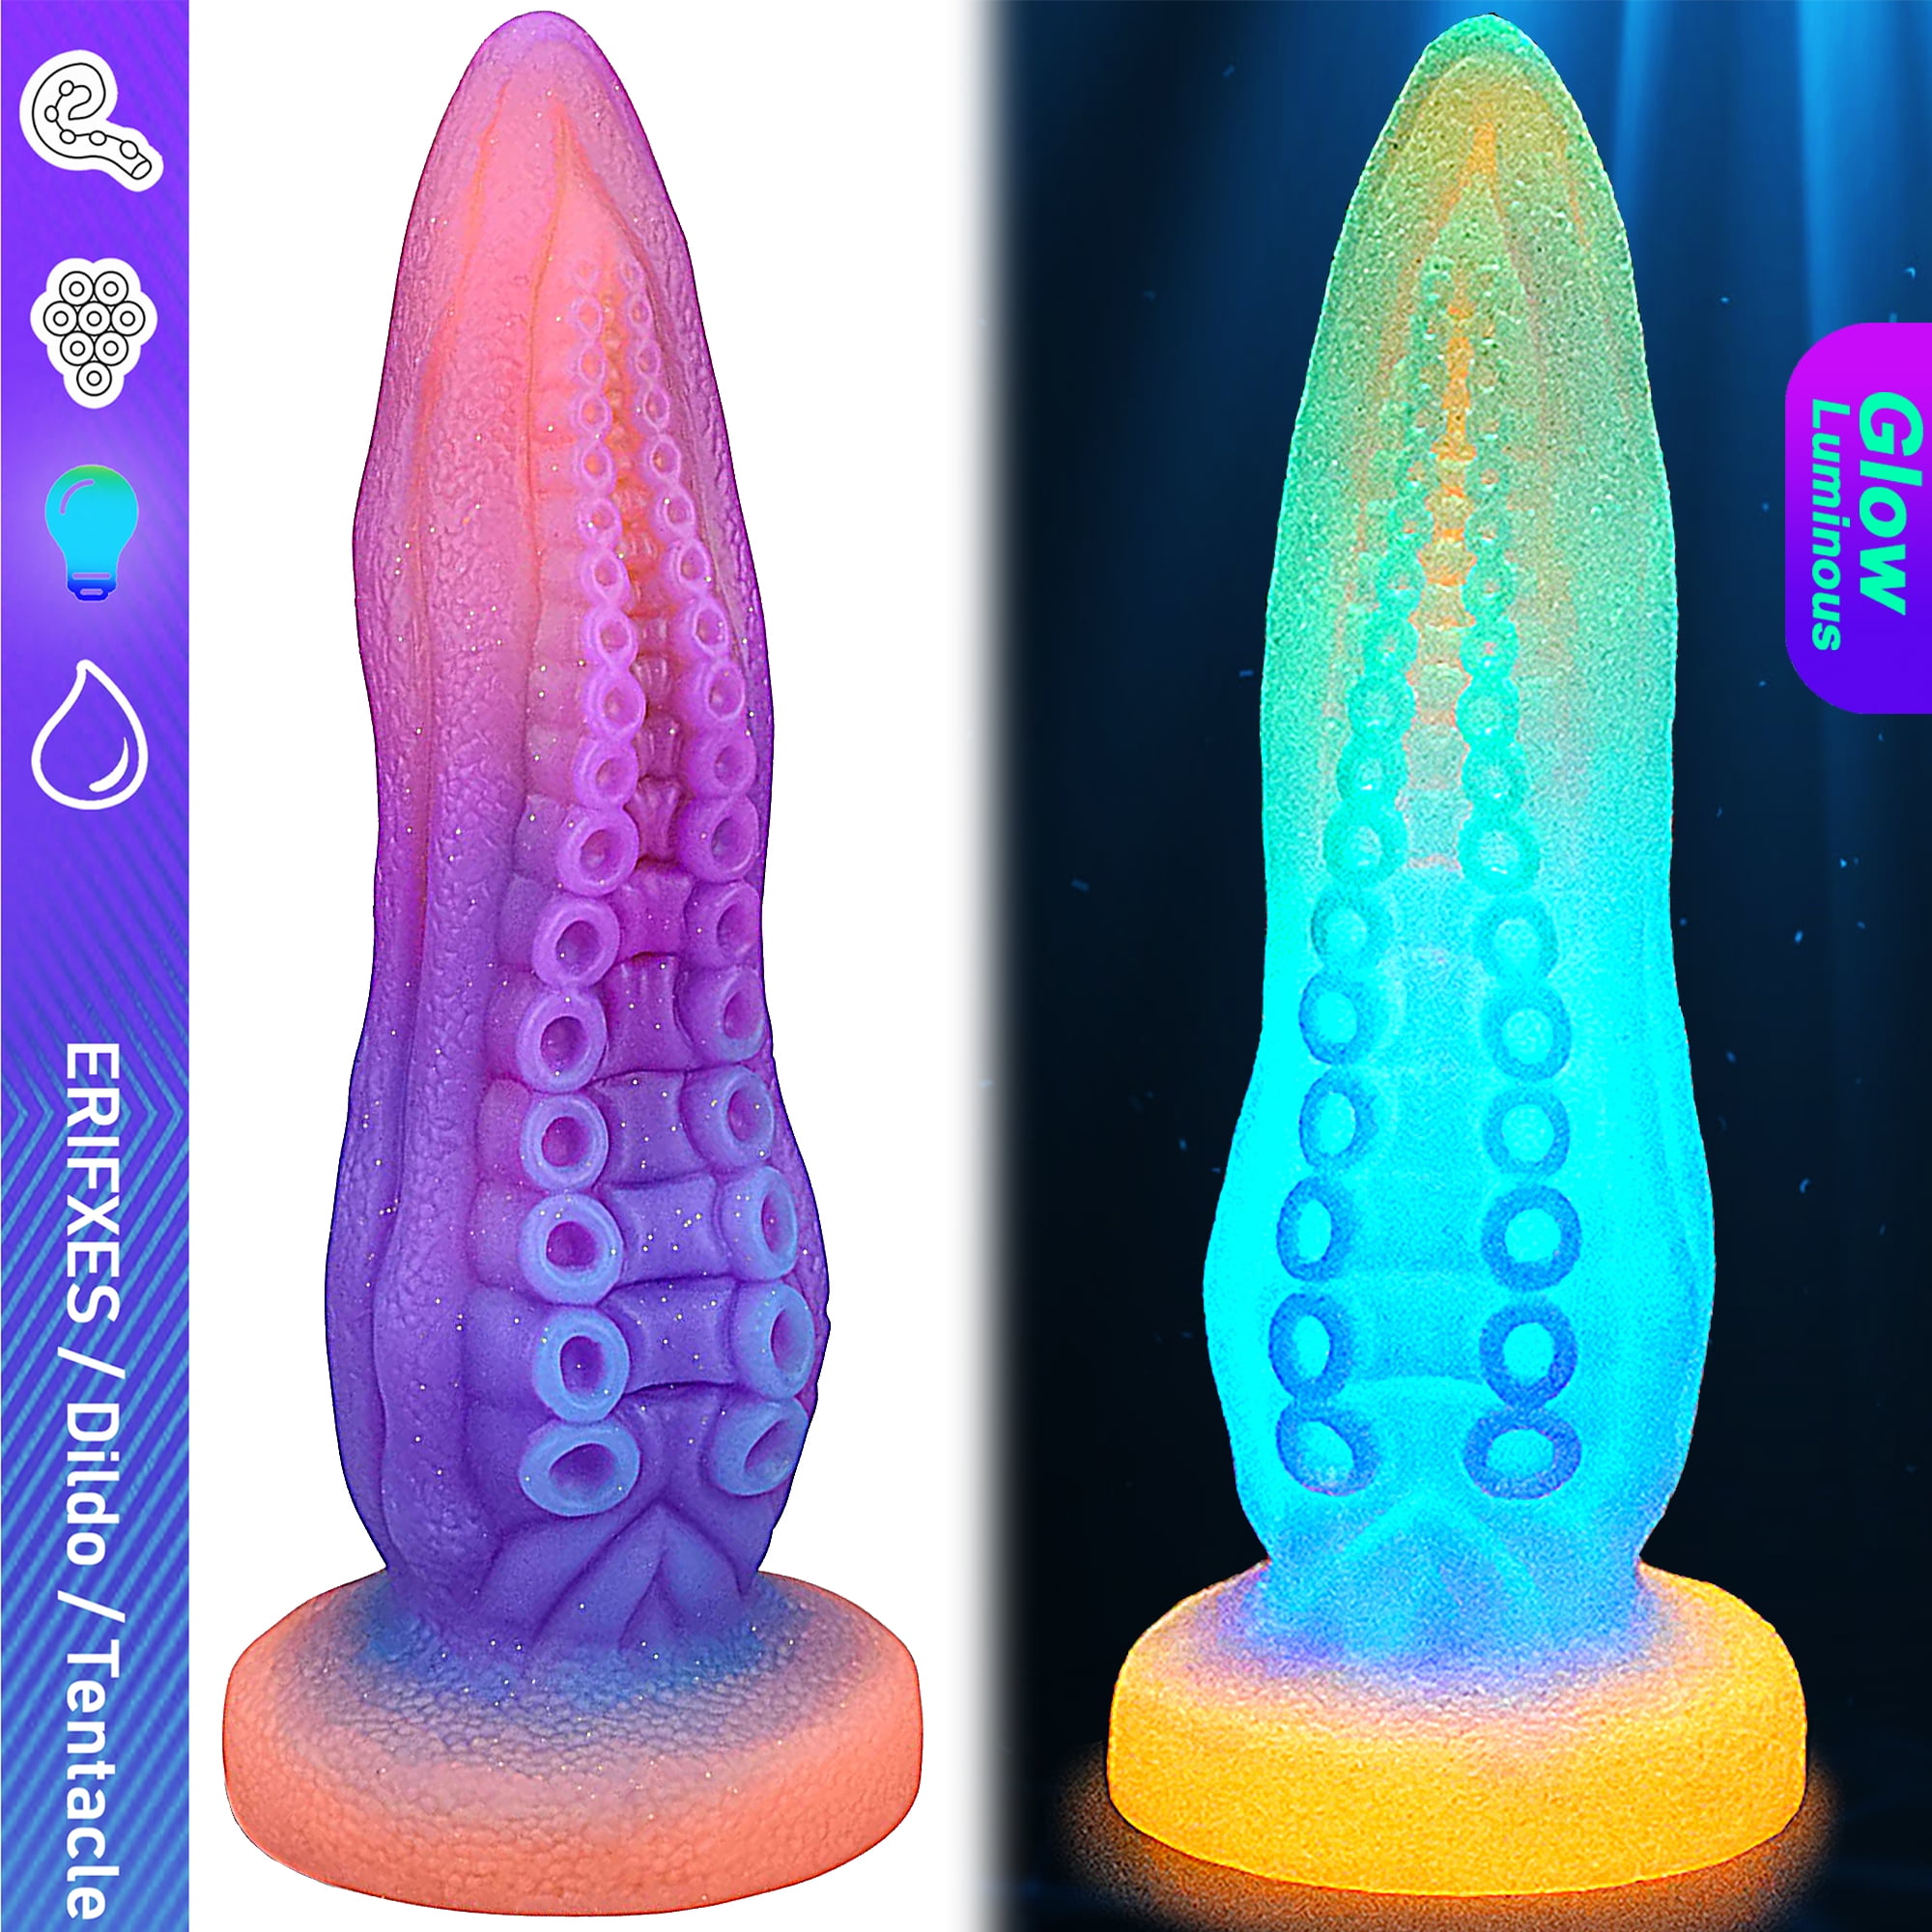 Erifxes Dildo Dildos Sex Toys 9.6 inch Huge Tentacle Adult Toy, Glowing Sucking Octopus Silicone Dildos with Suction Cup, G Spot Stimulator Sex Toy for Women Pleasure Hands-Free Play pic